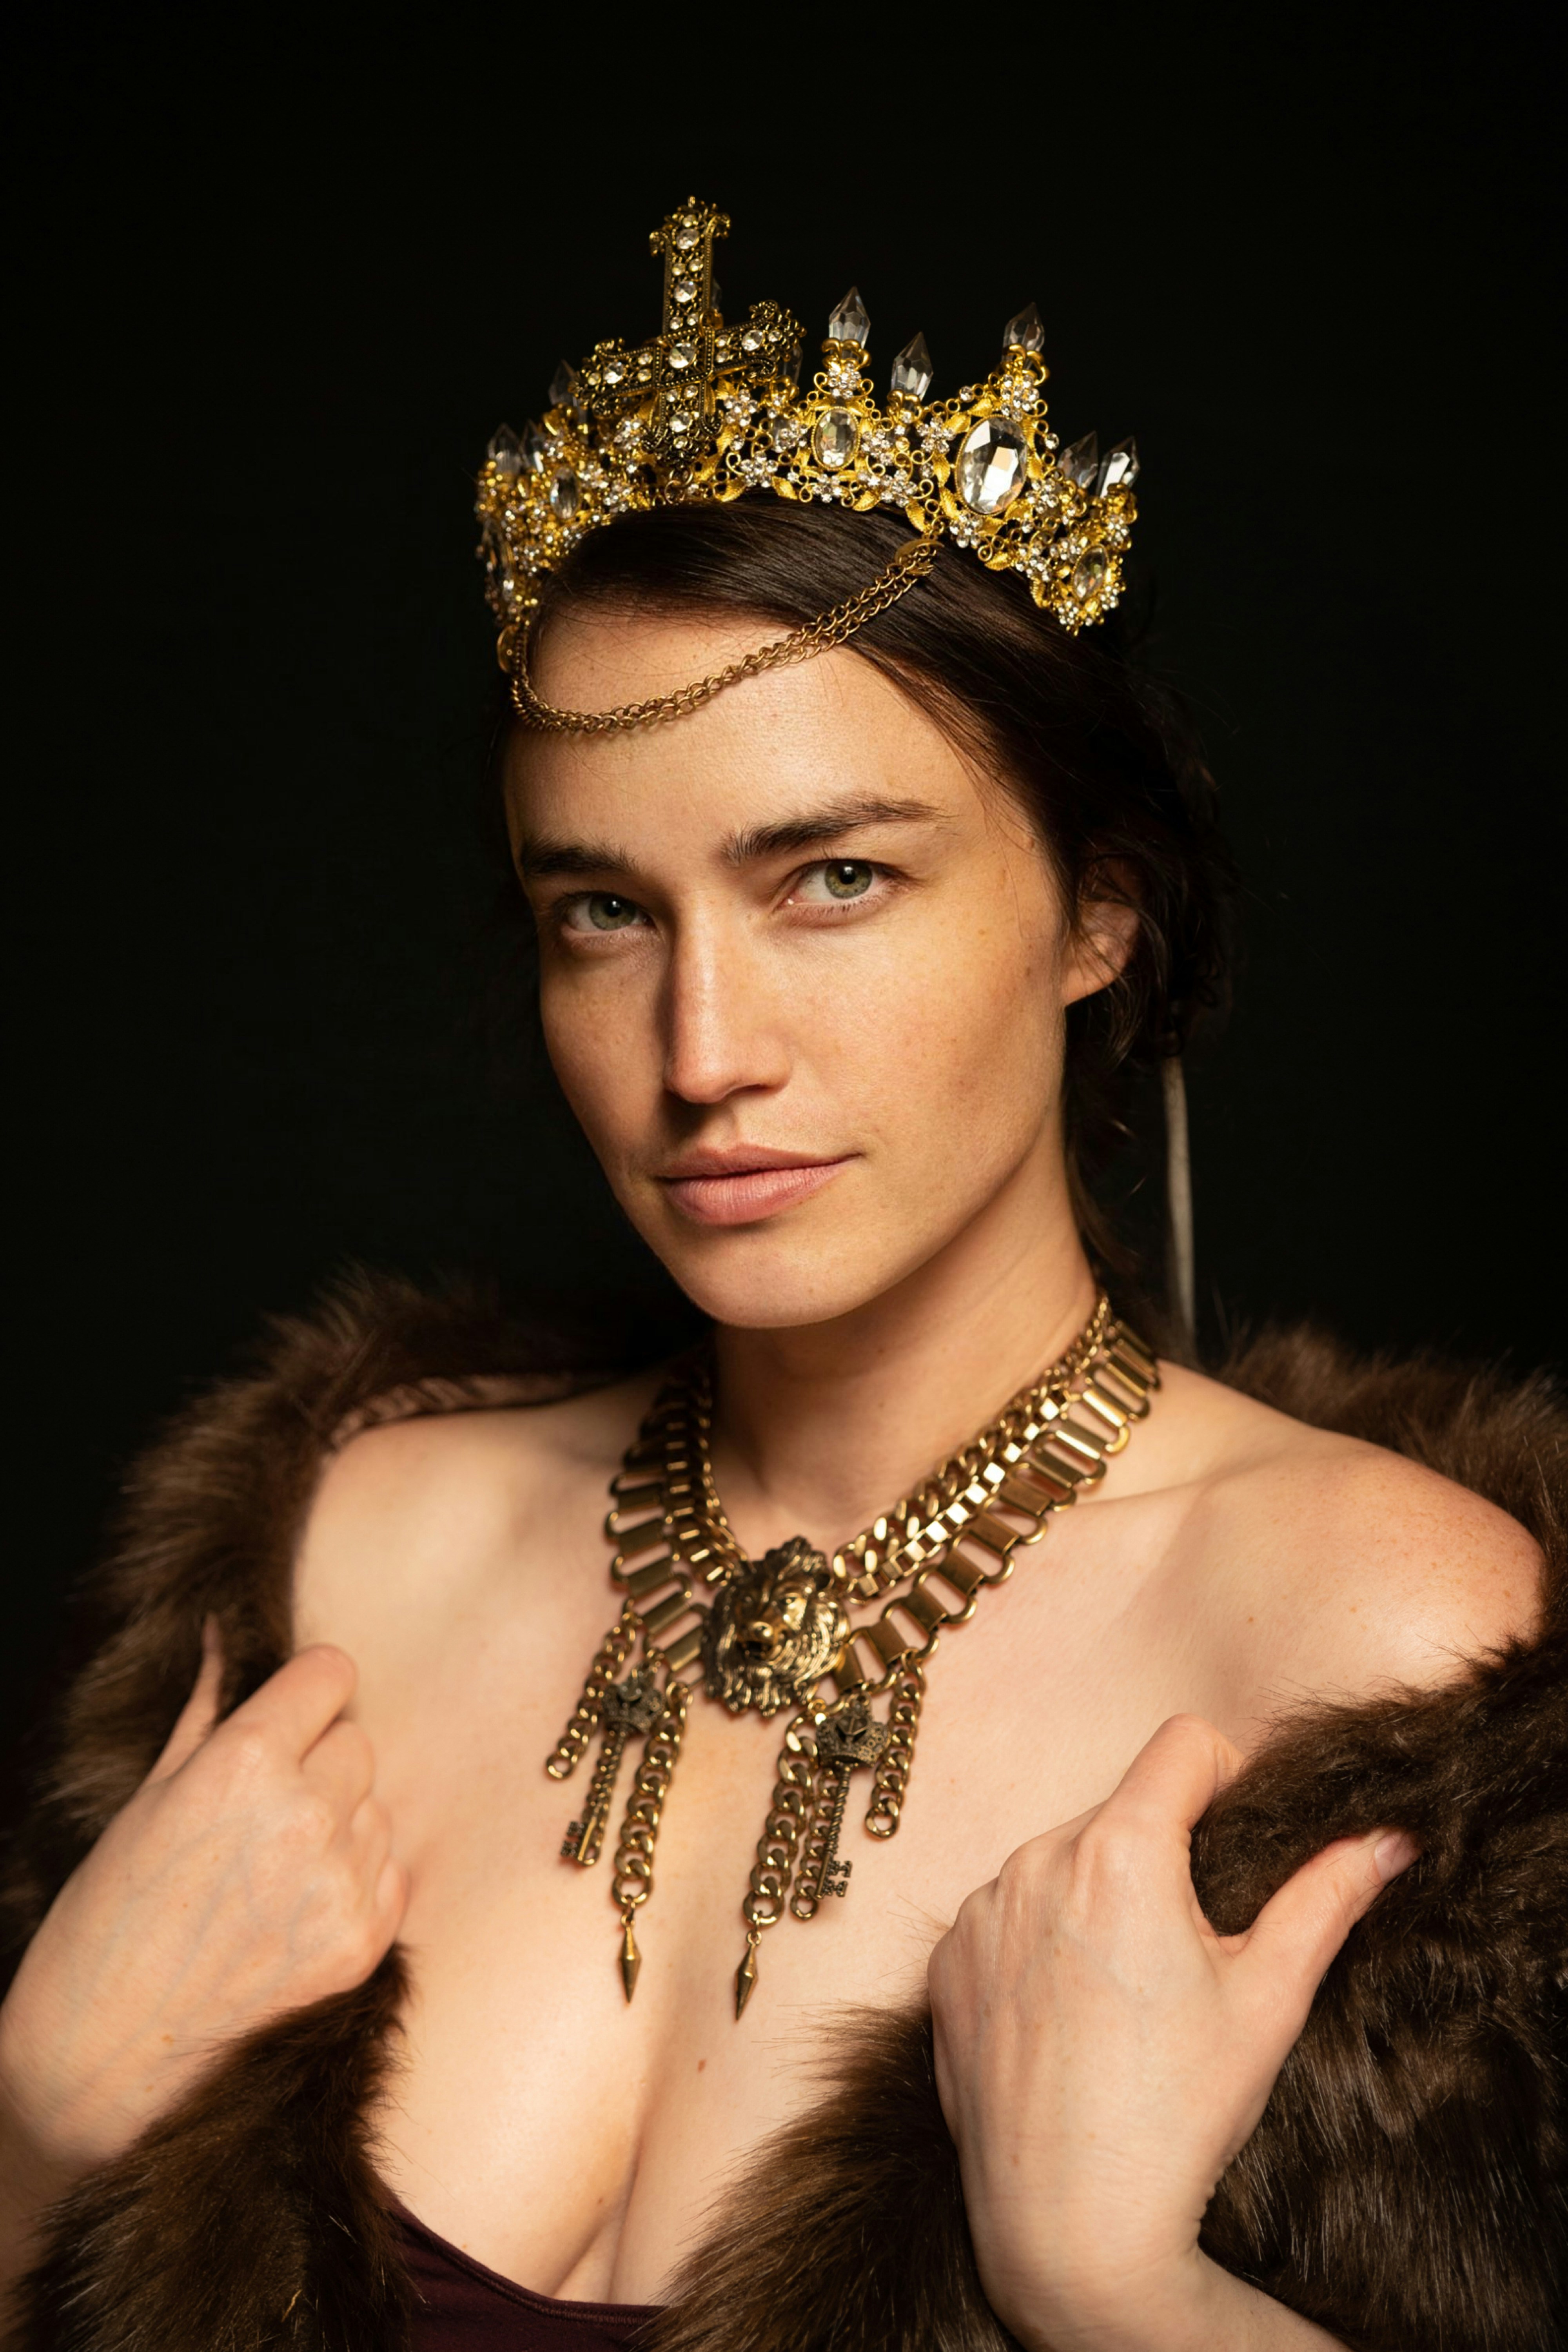 Portland Fashion Model wearing a gold crown and necklace Portrait taken by Portland Photographer Lance Reis on my Sonya7iii in my photography studio.